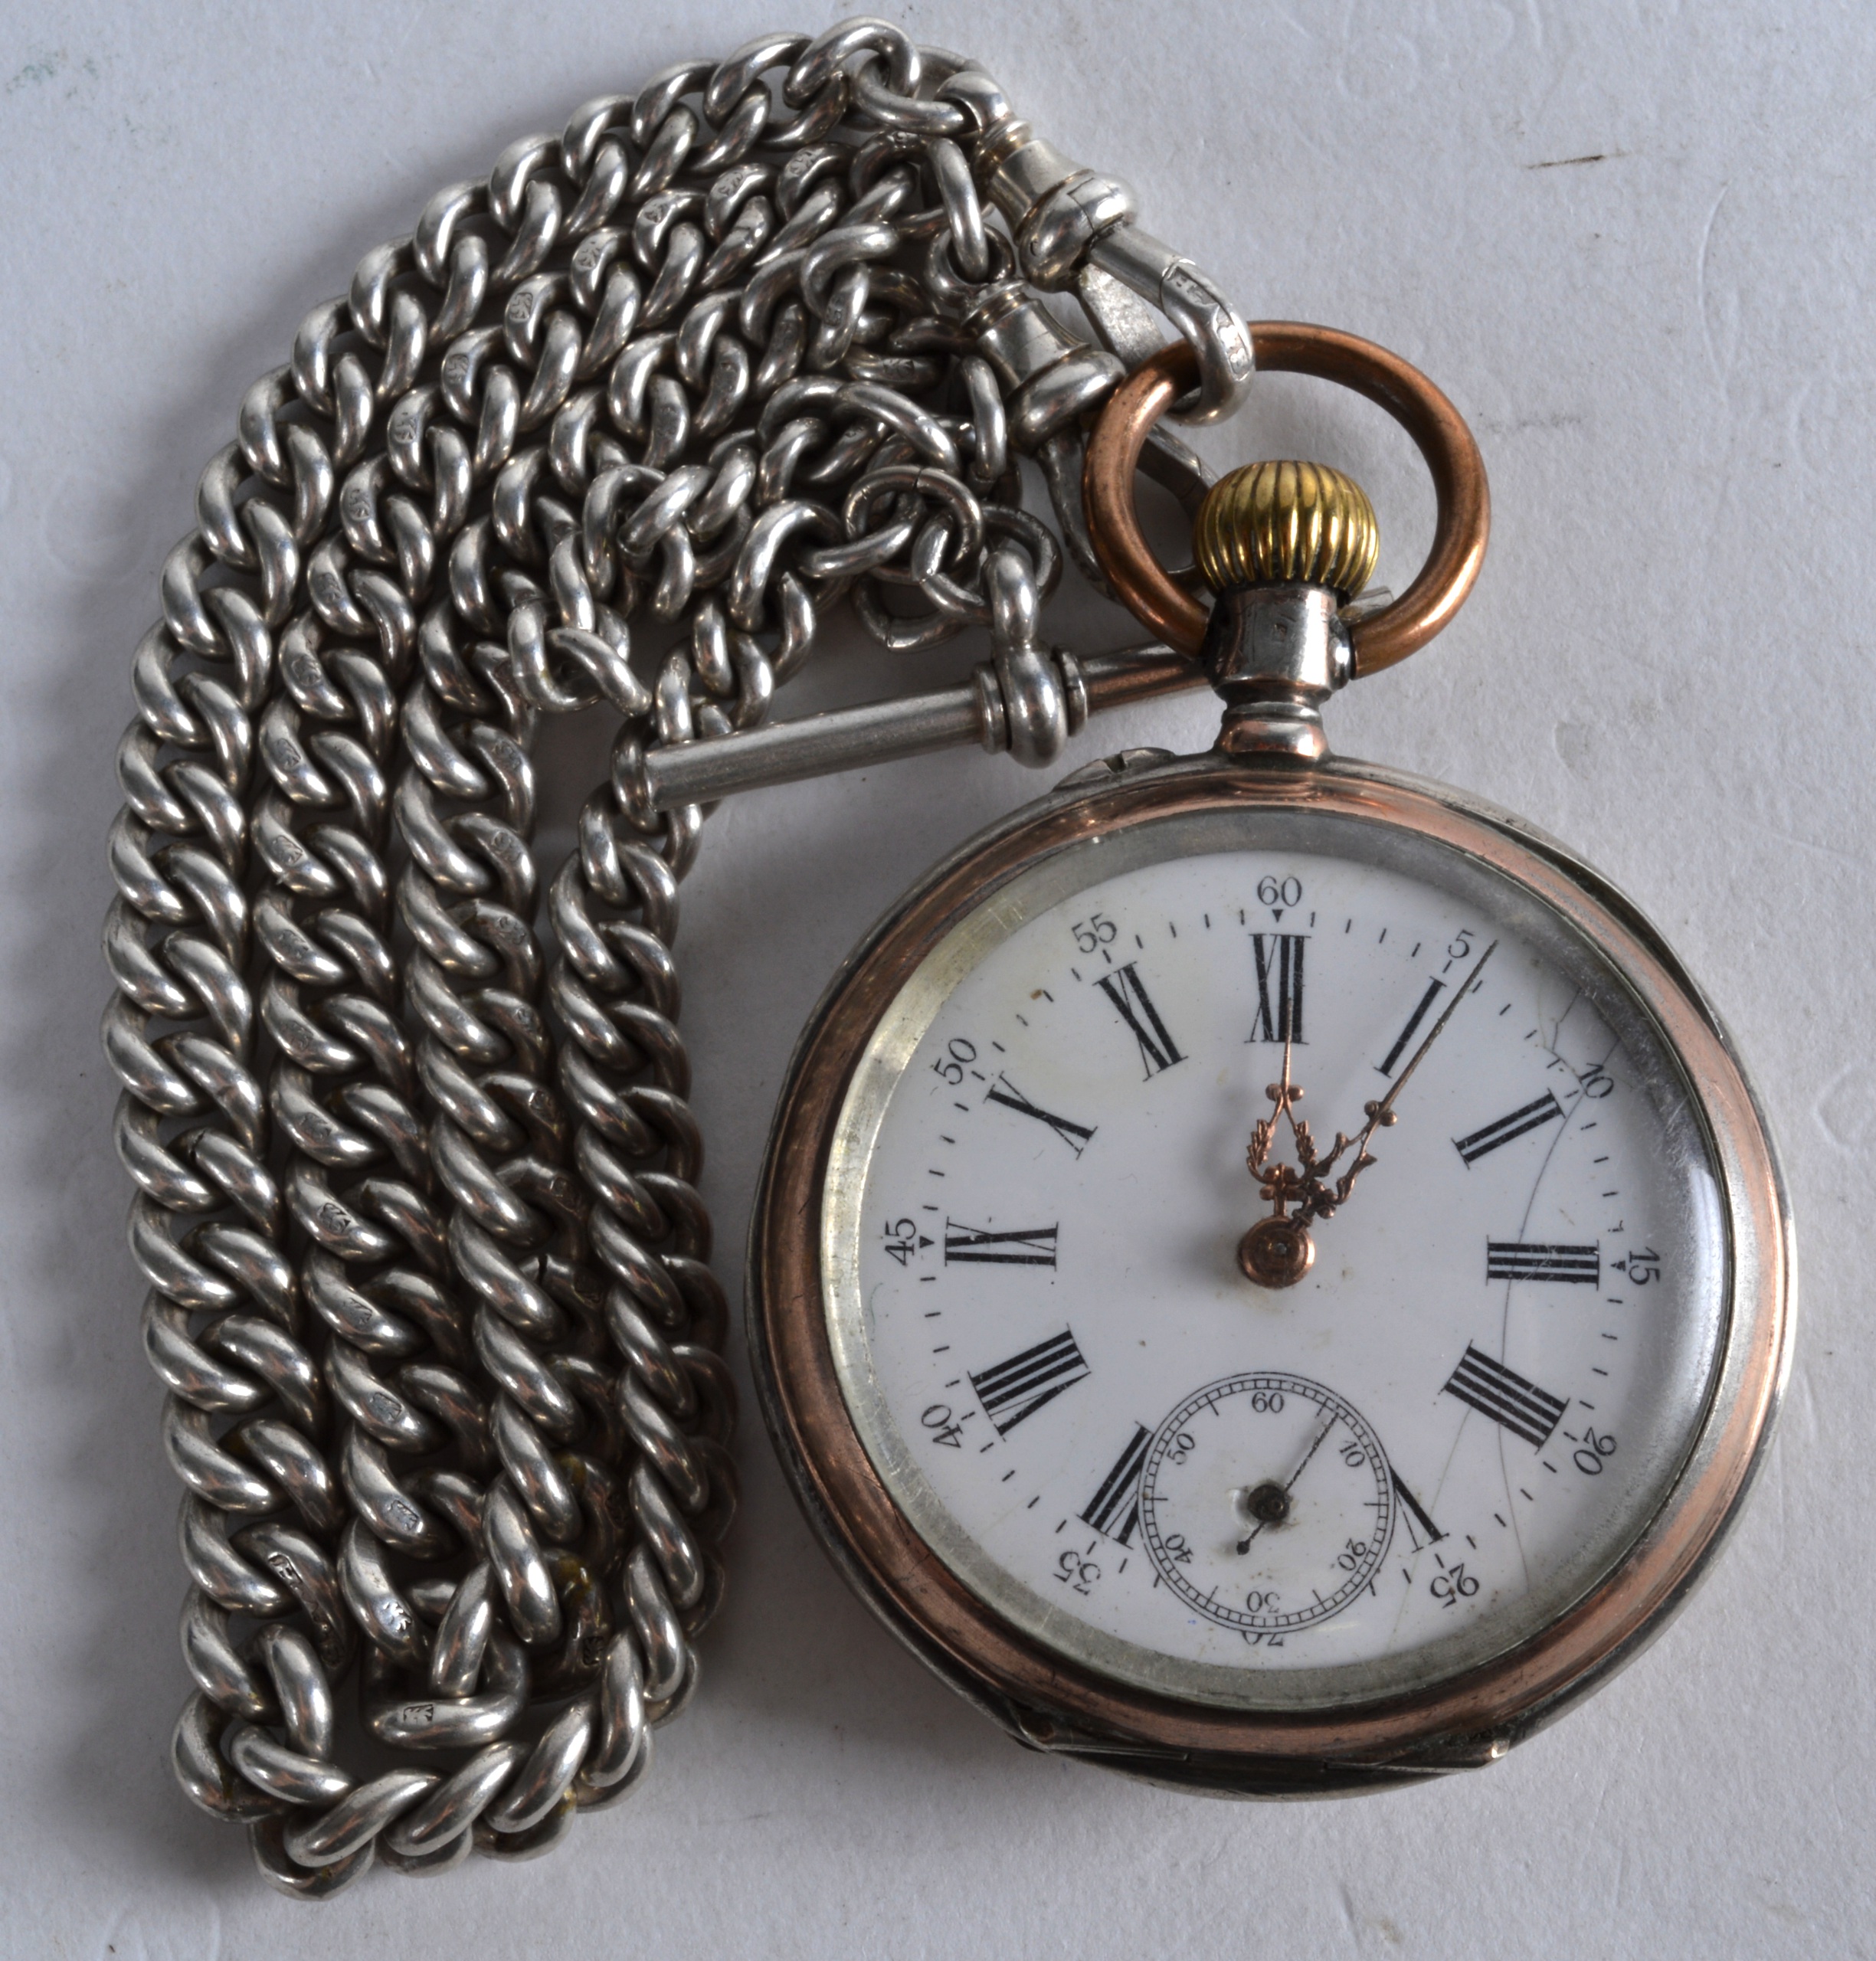 A LATE 19TH CENTURY CONTINENTAL SILVER POCKET WATCH with attached silver chain, the case decorated